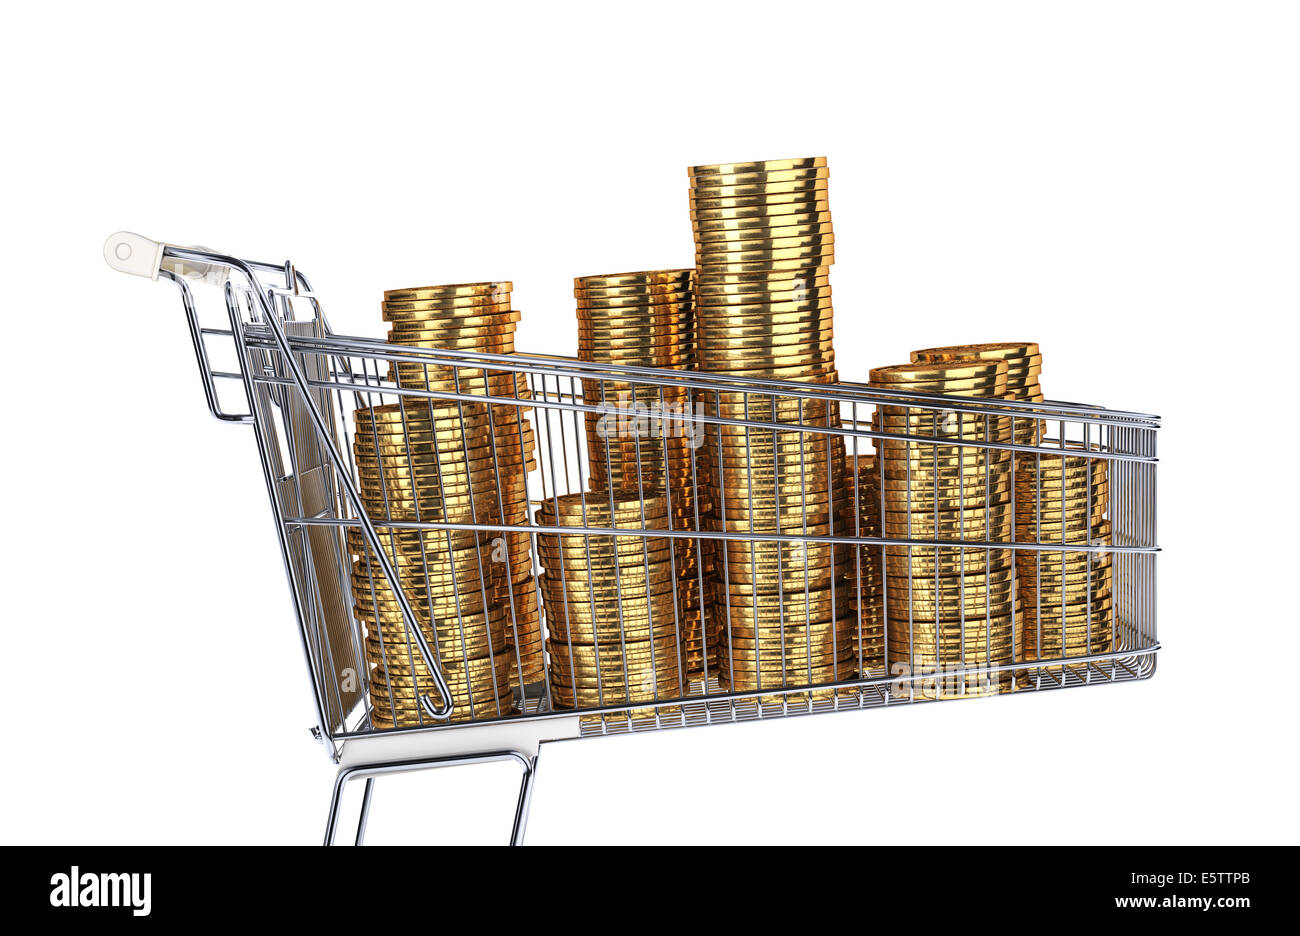 Supermarket trolley full of very big golden coins stacks. Side view on white background. Stock Photo